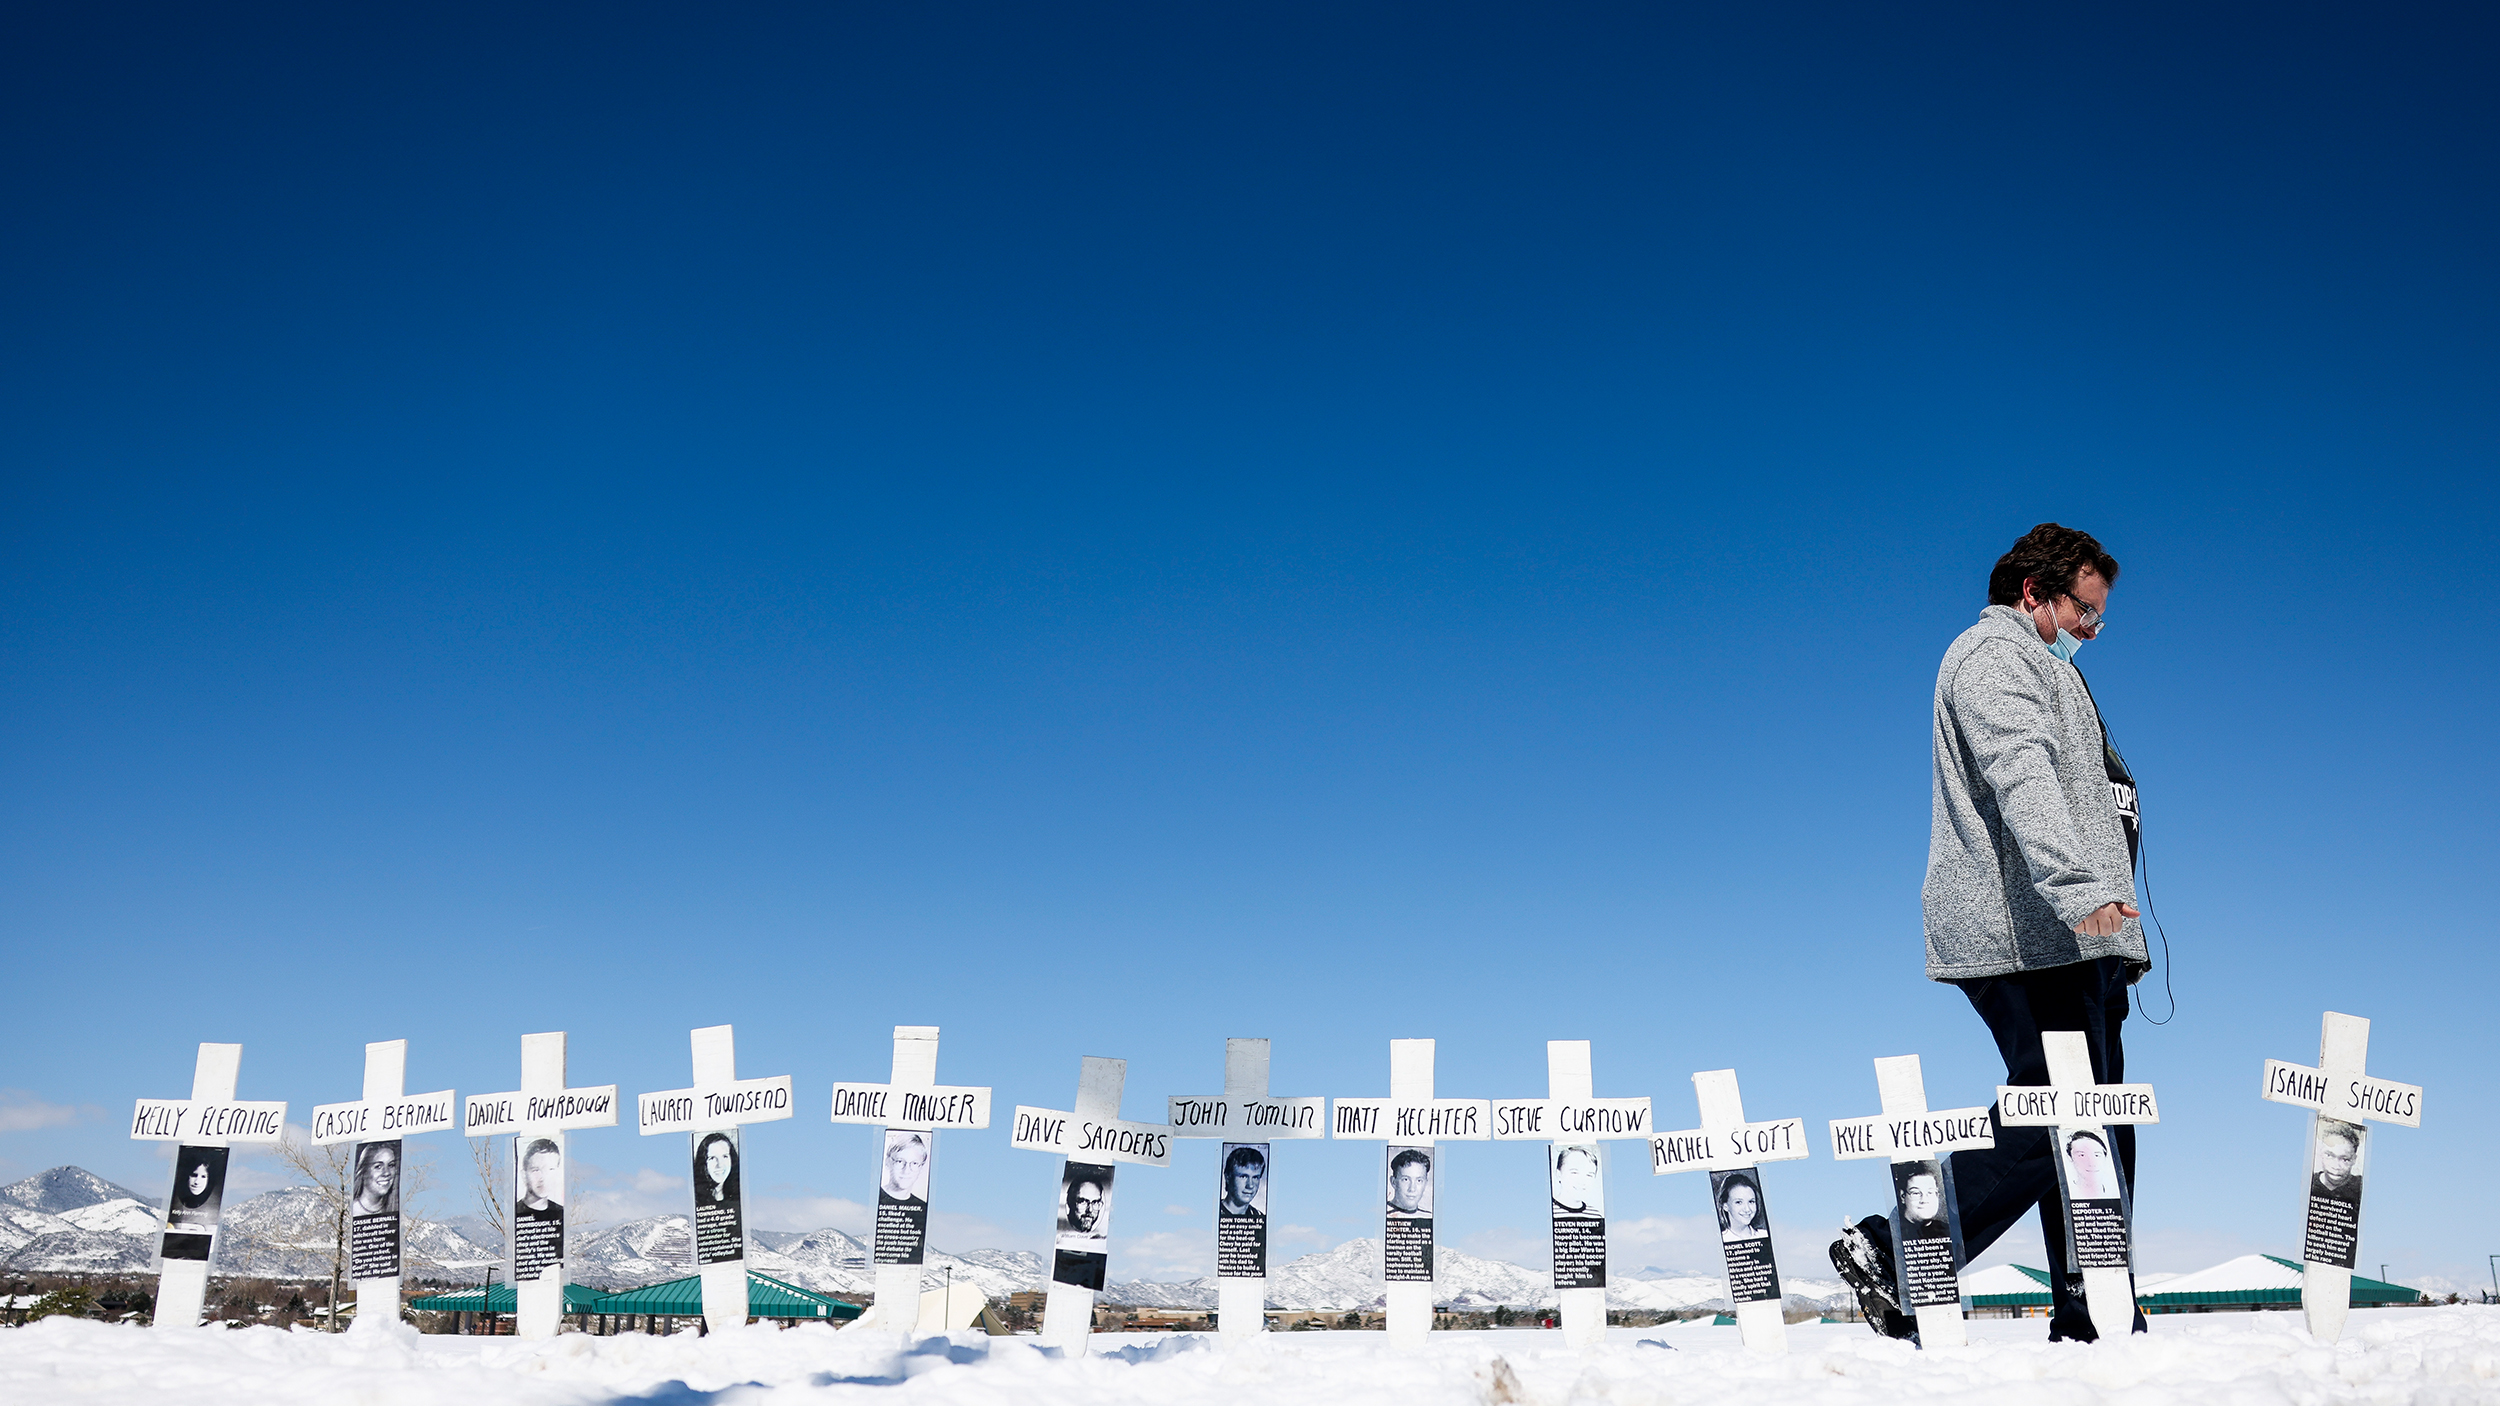 A person walking past rows of white crosses with photos and names, commemorating victims of a mass shooter, set against a snowy background and clear blue sky.